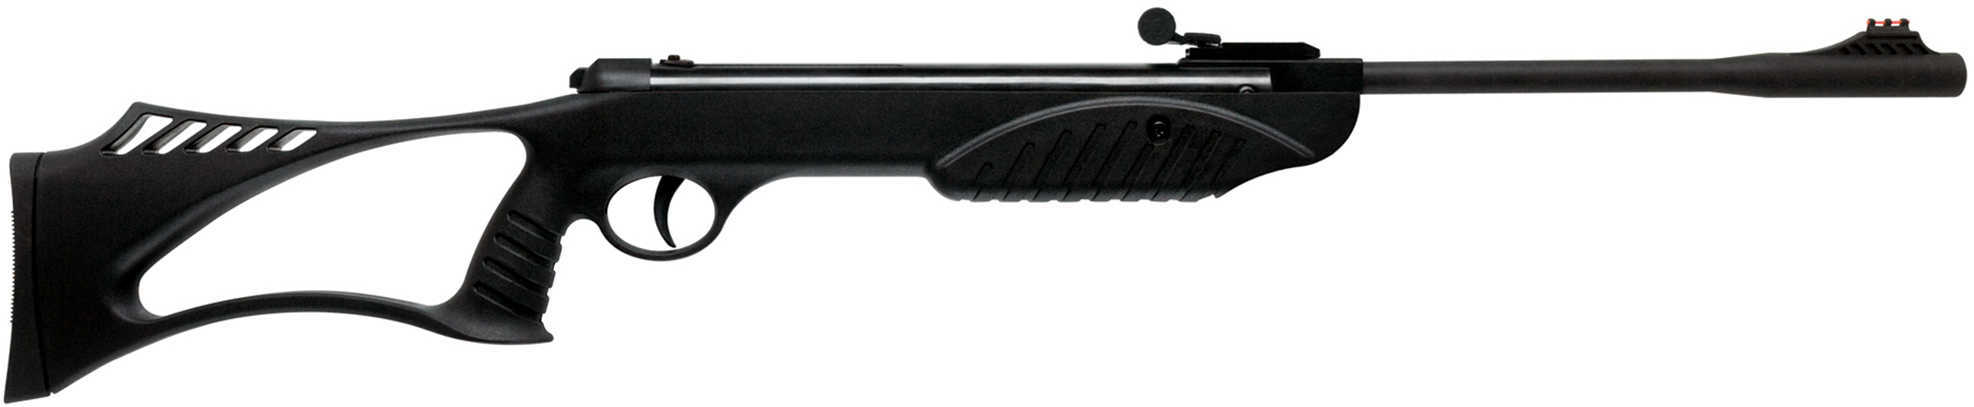 RWS Ruger® Explorer Youth Air Rifle .177 Caliber Black Synthetic